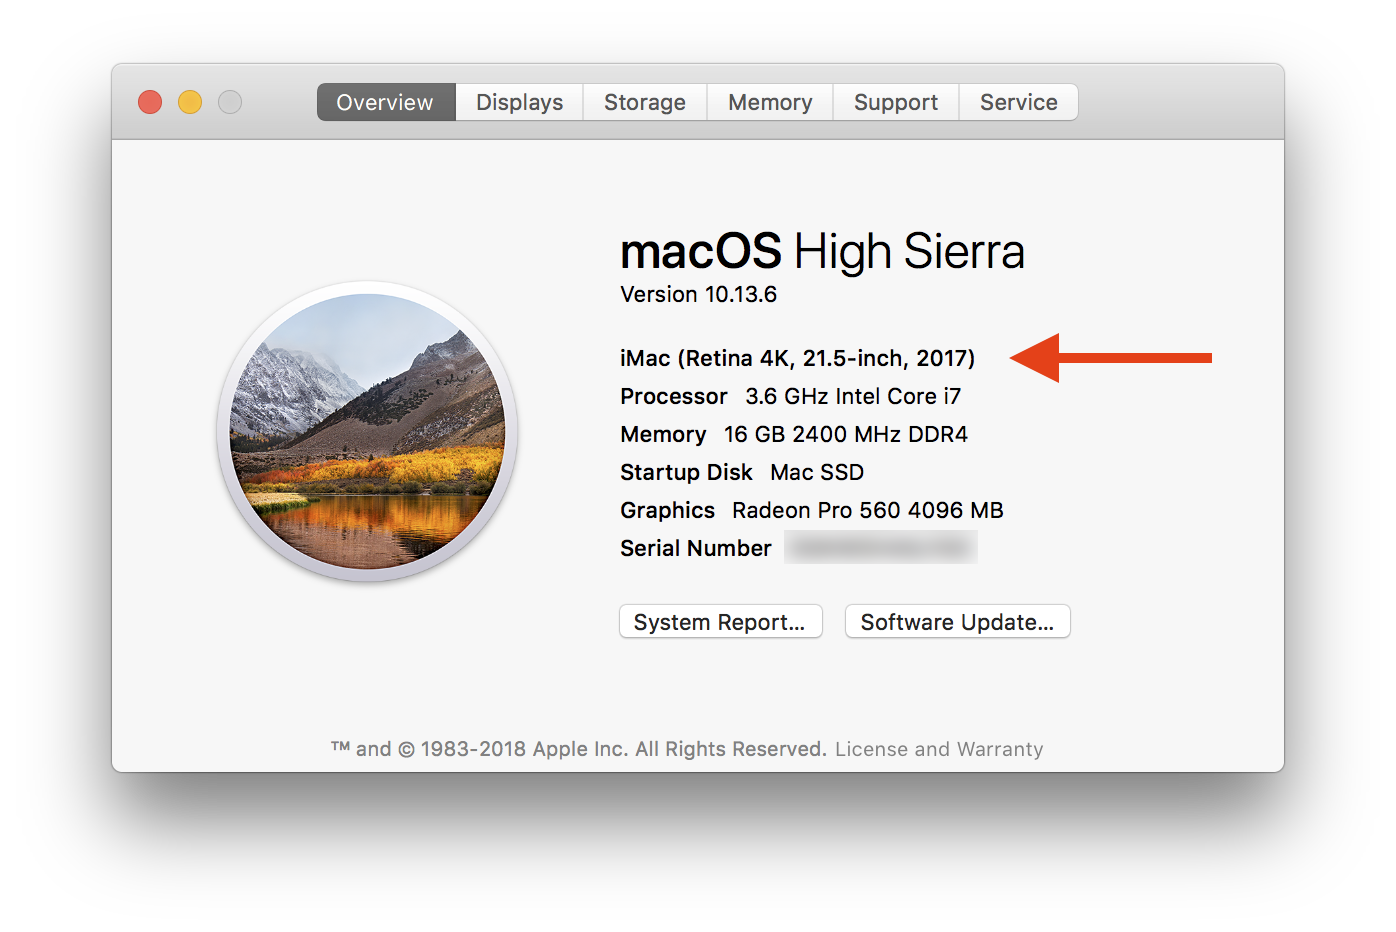 What is the latest whatsapp update for macos sierra mac